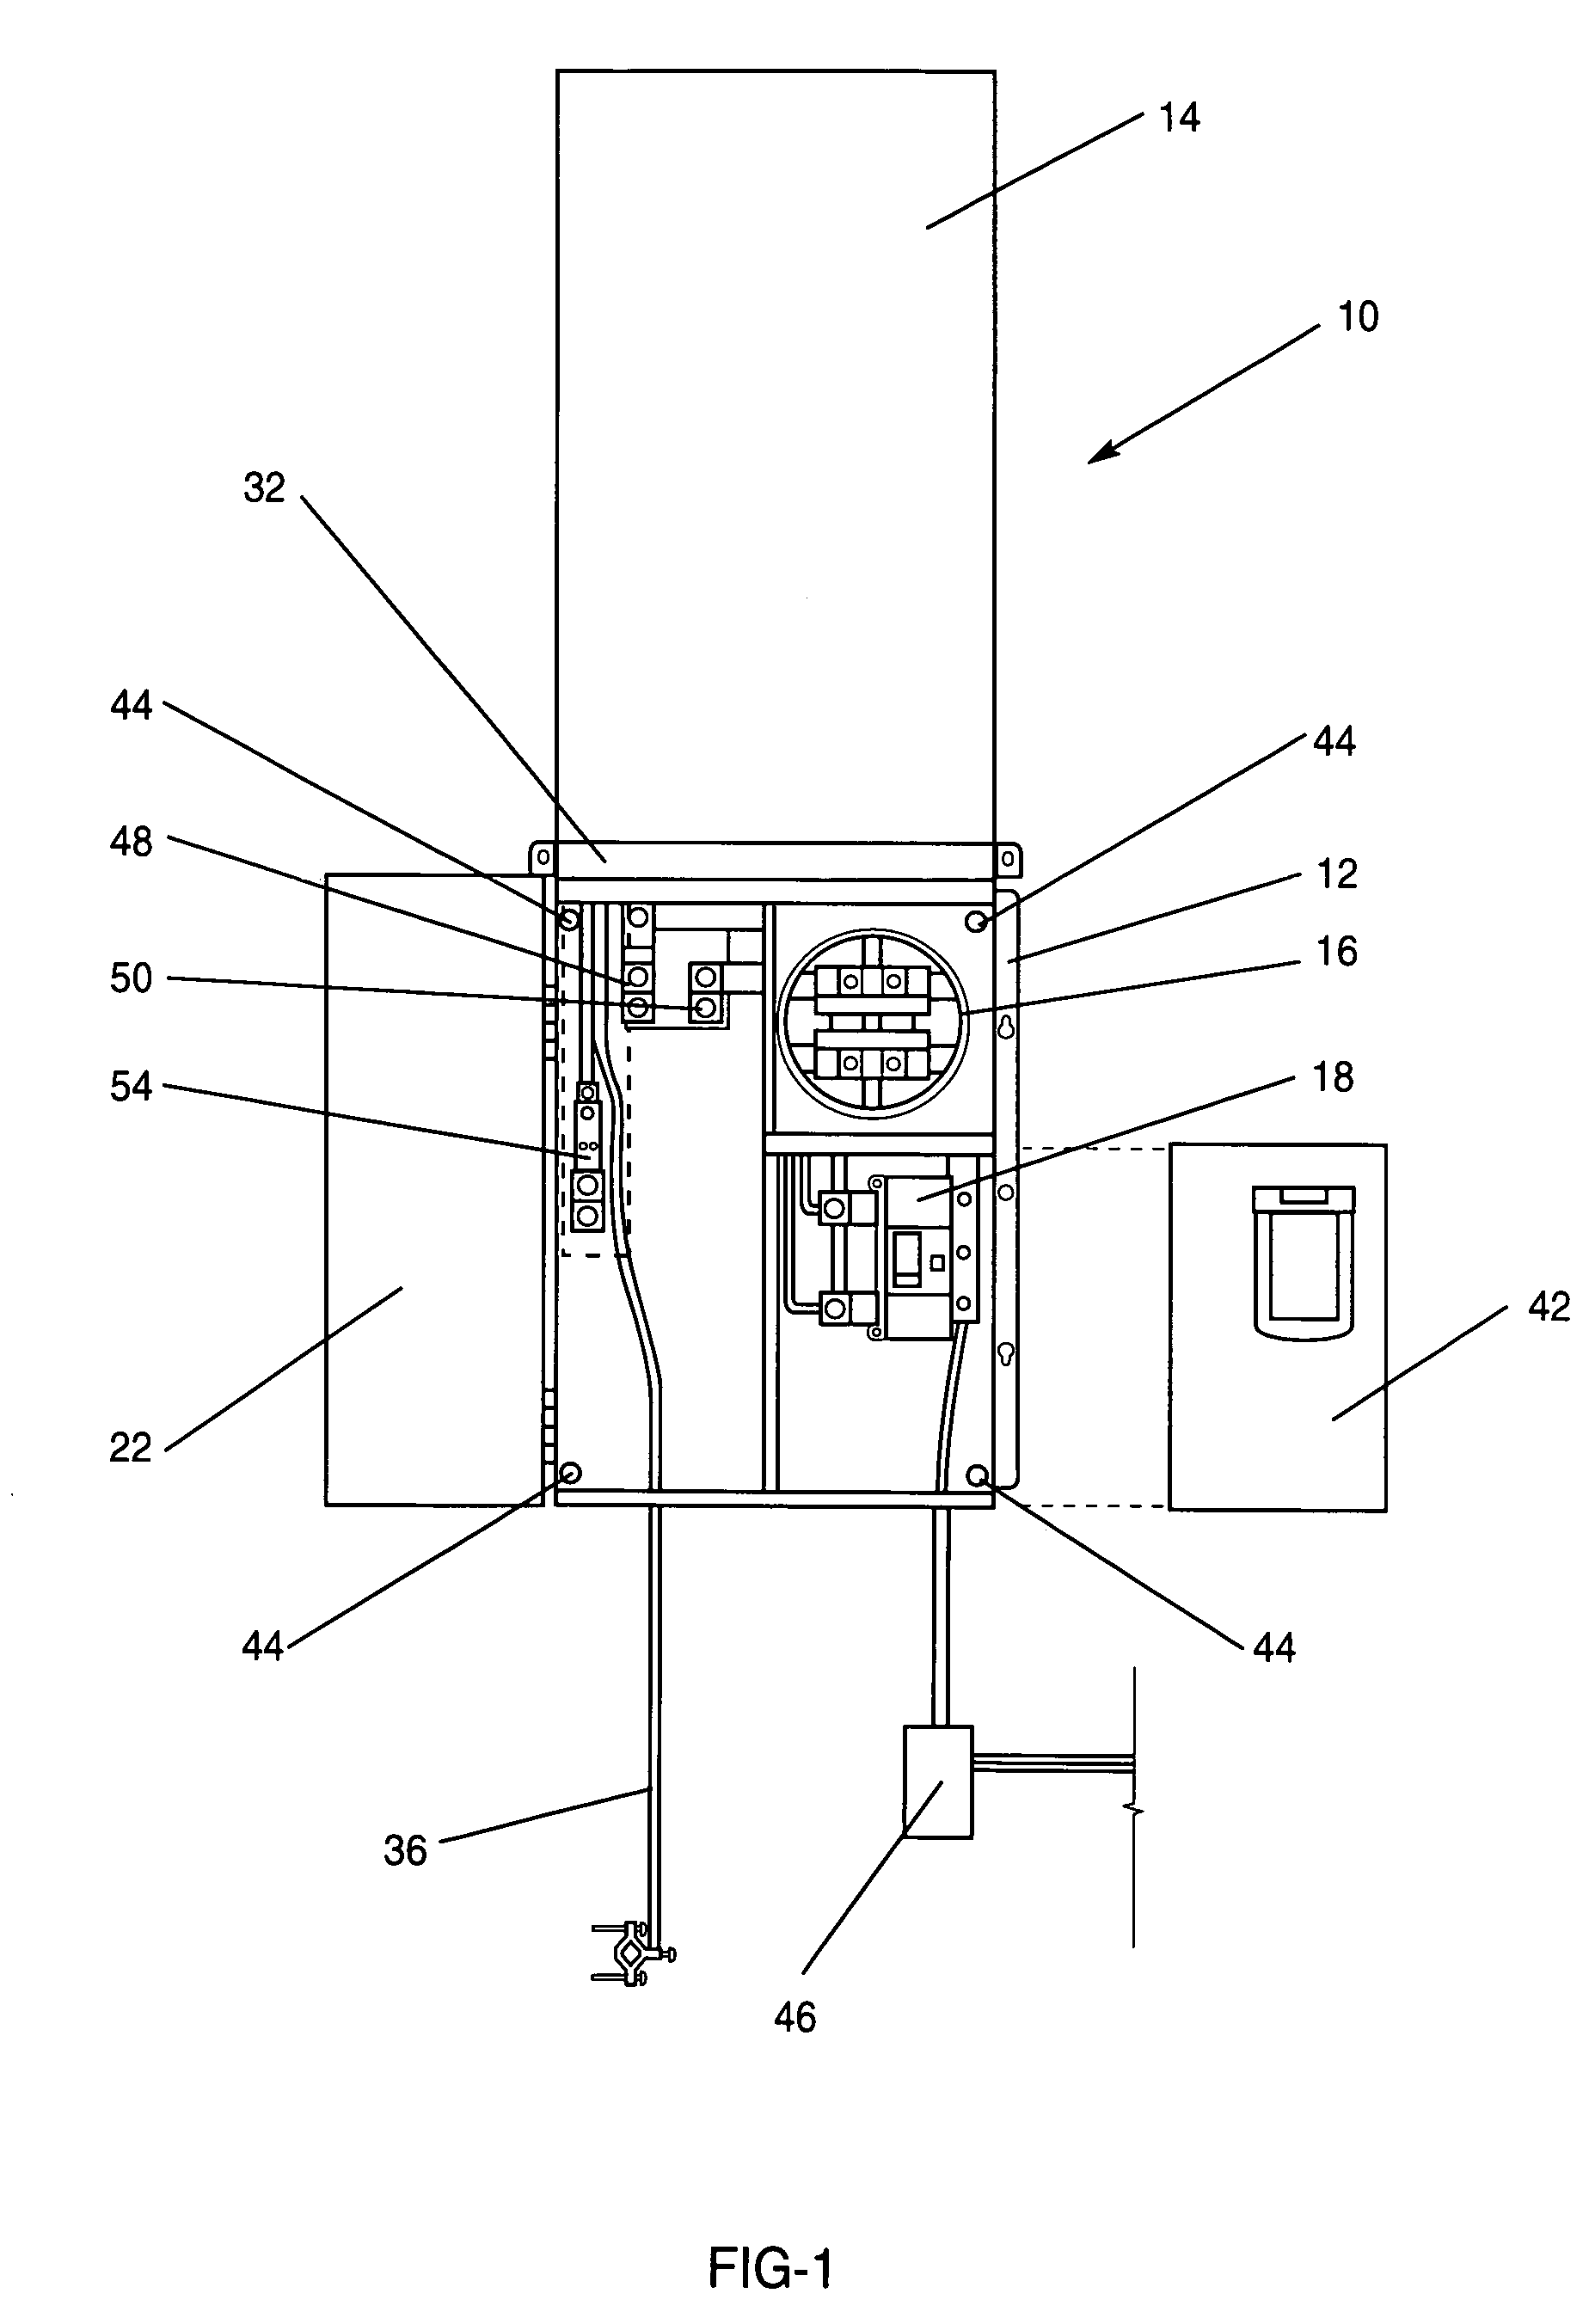 Combination service entrance apparatus for temporary and permanent use